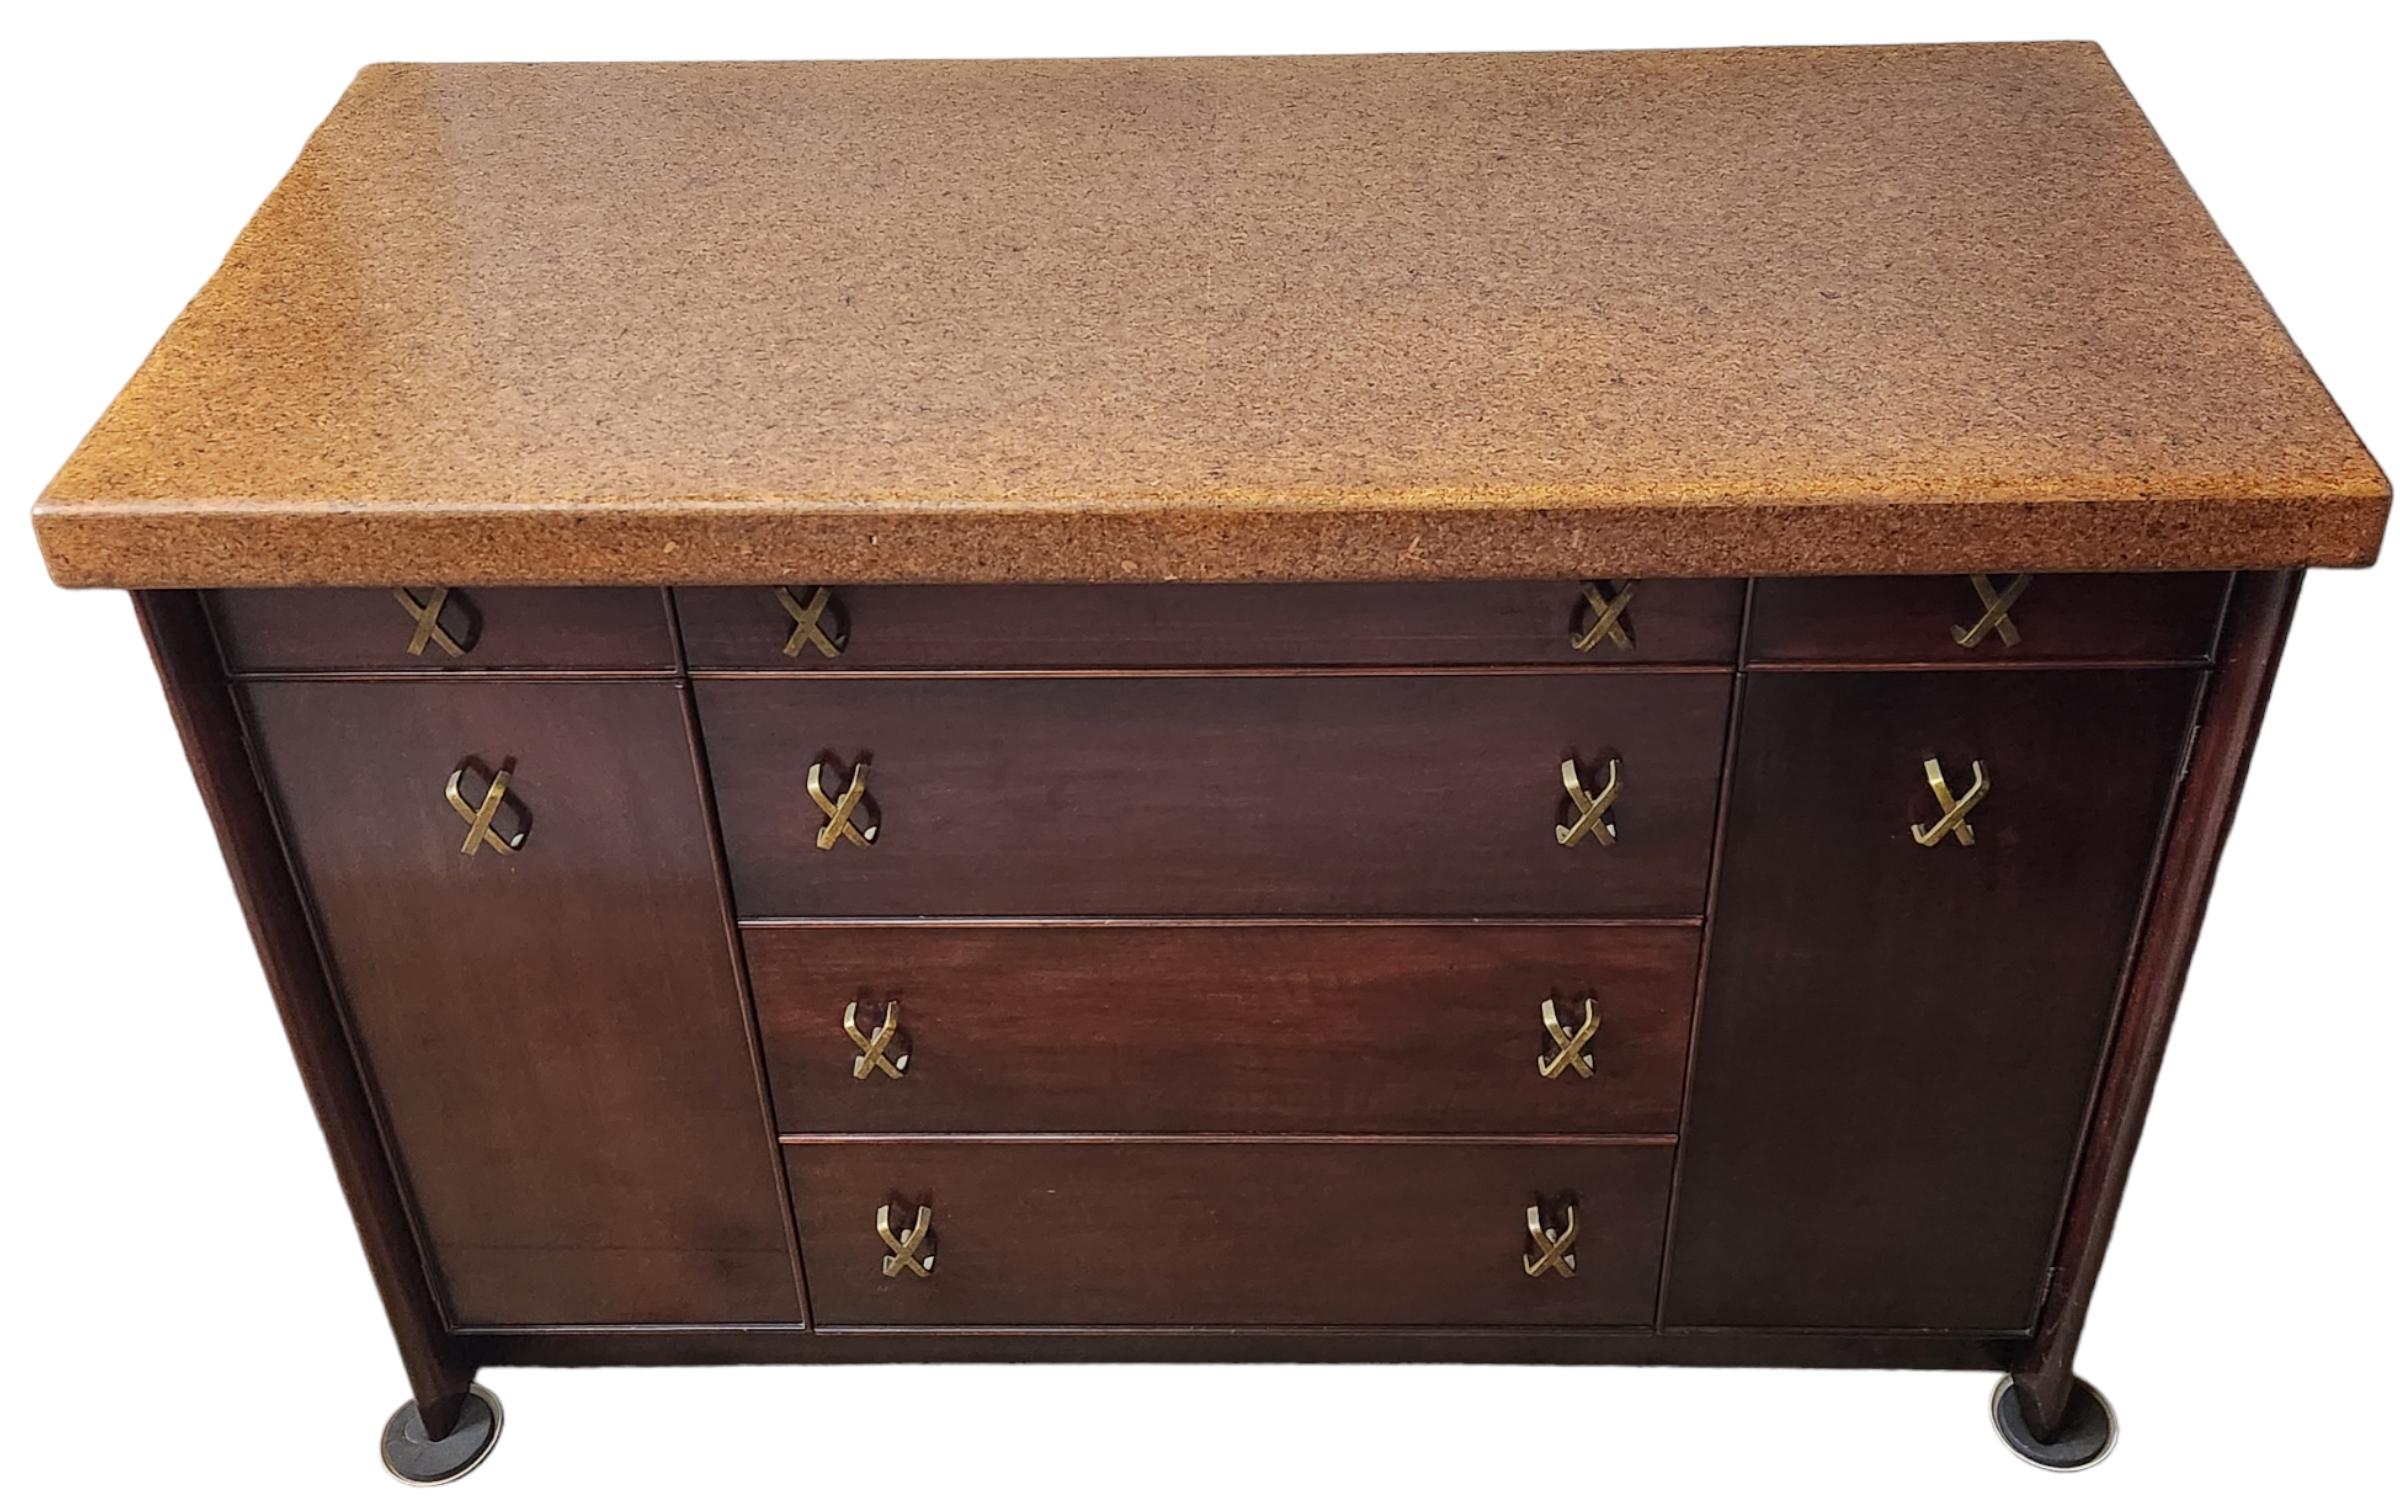 Paul Frankl sideboard with two side doors and six drawers manufactured by Johnson Furniture Company of Grand Rapids, Michigan from the 1950s.
Cork topped cabinet of rosewood stained maple restored in very good condition.

